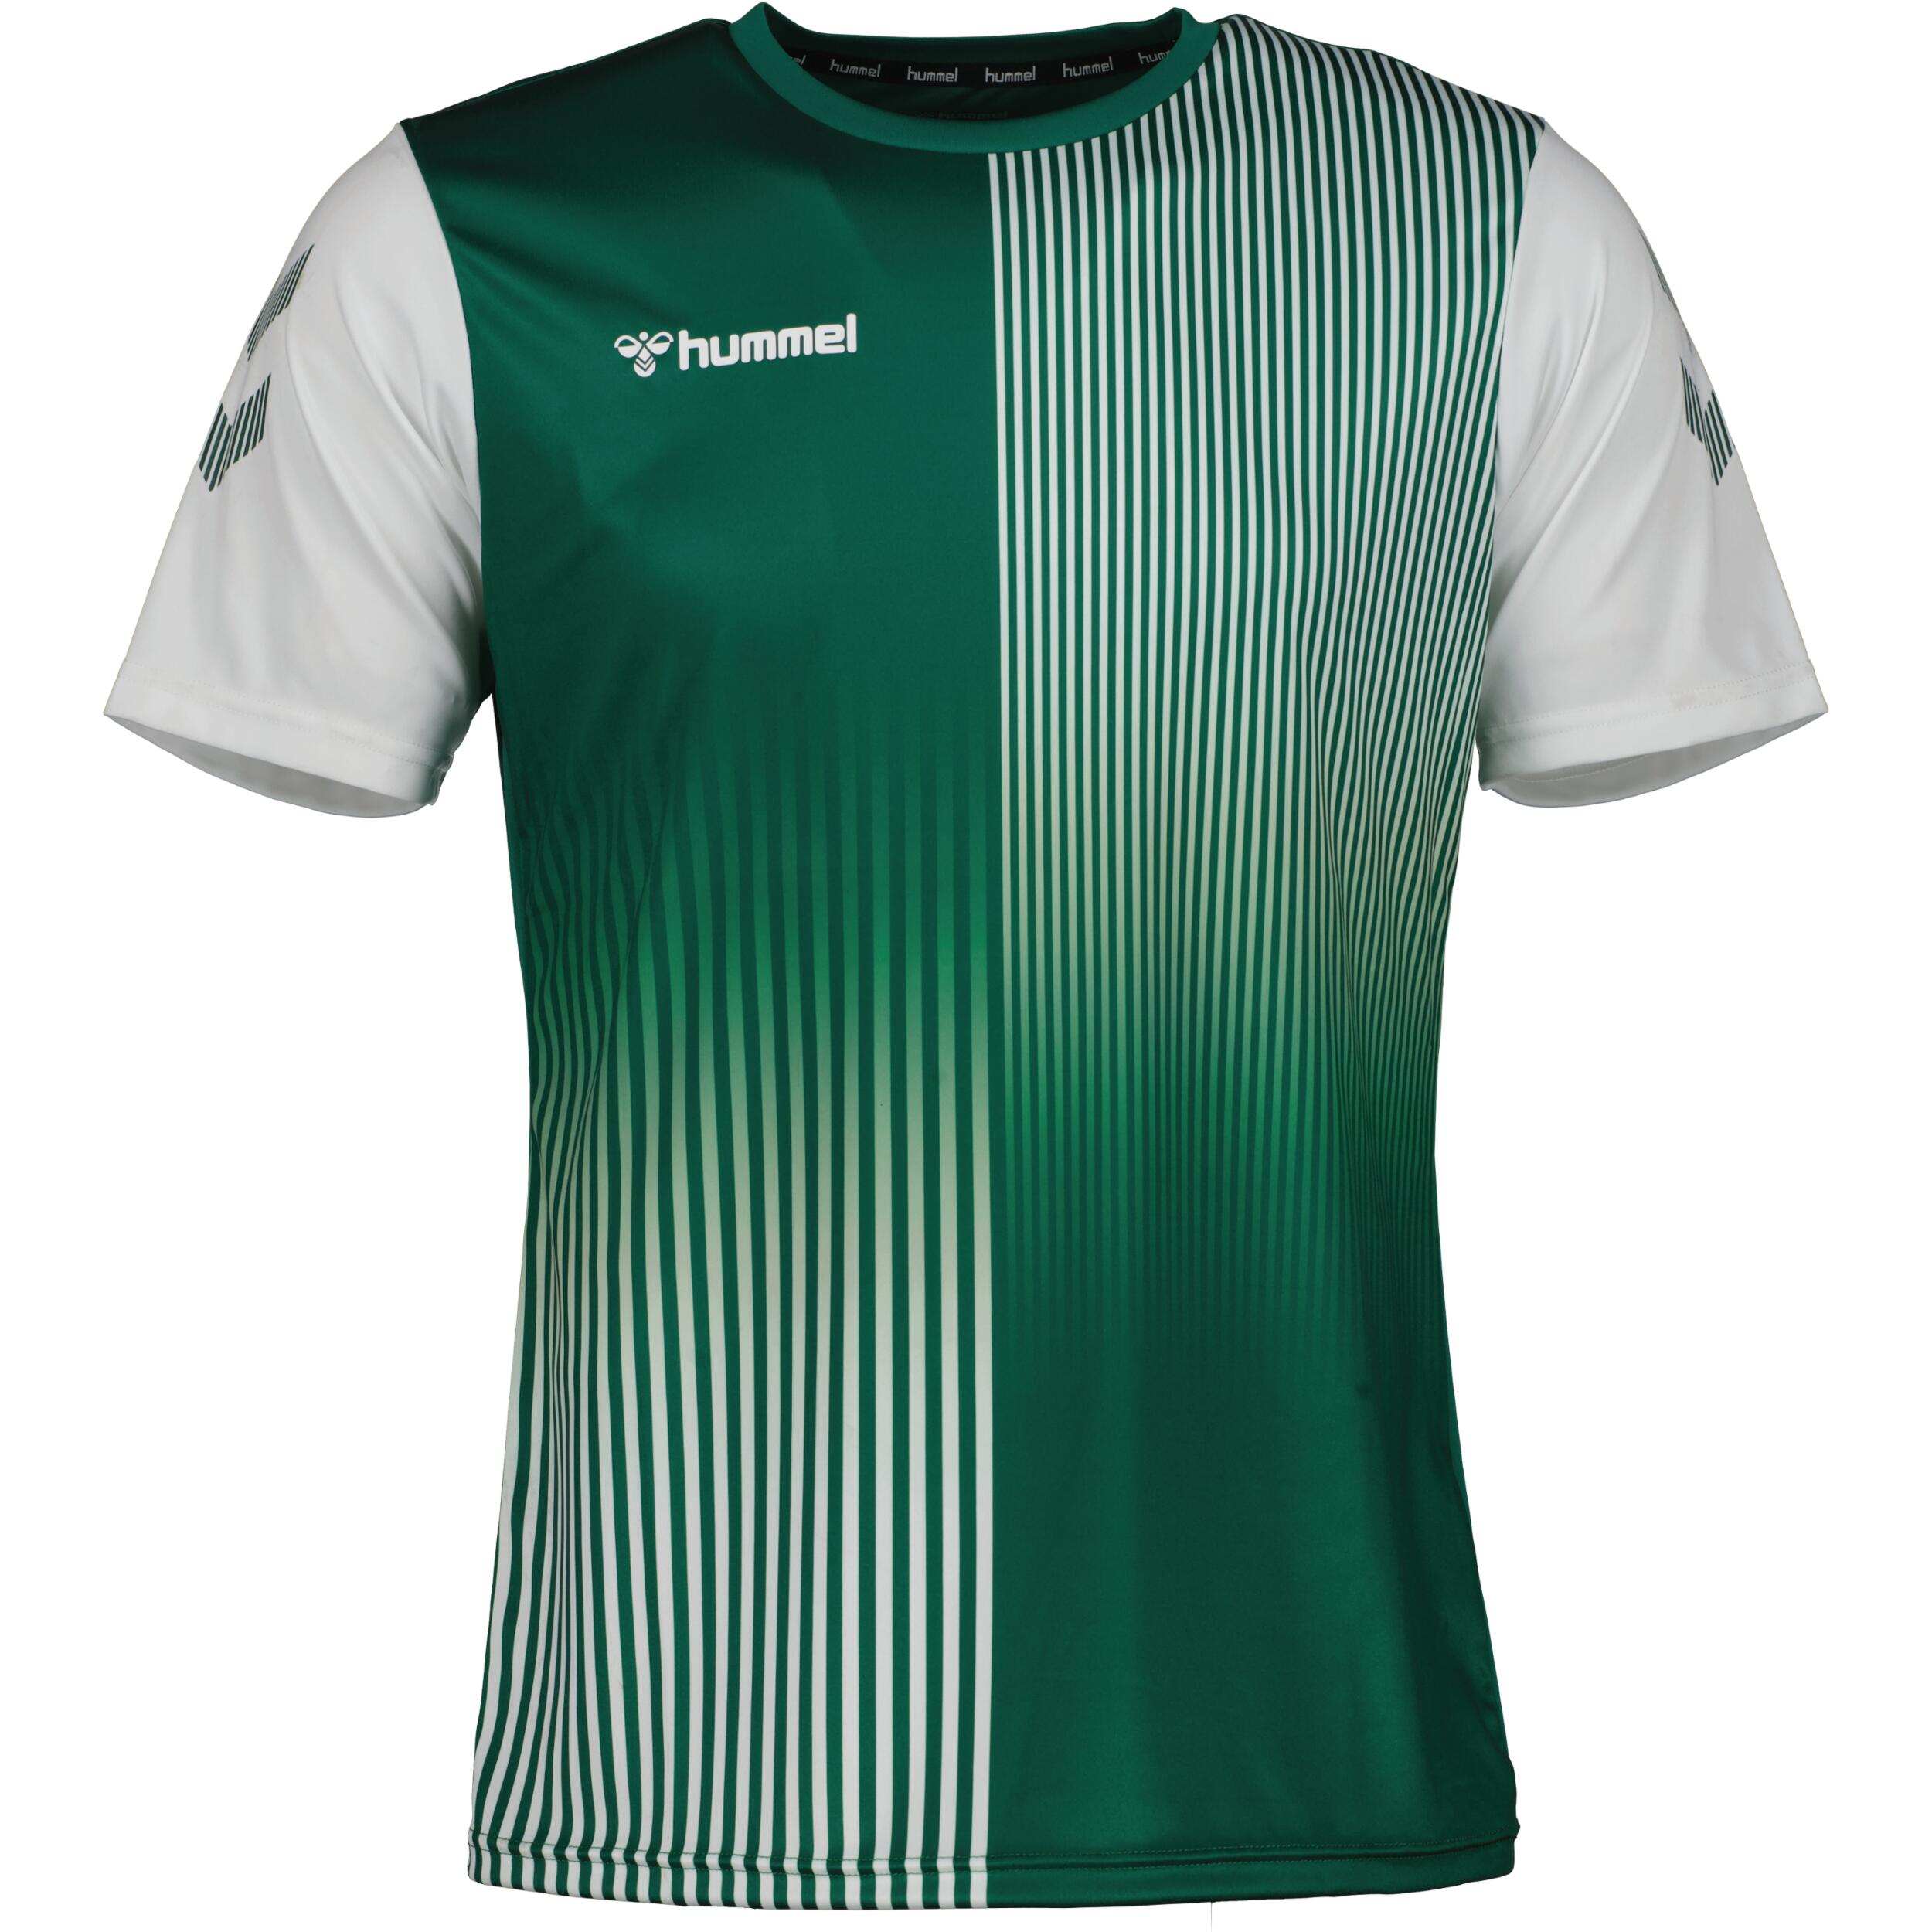 HUMMEL Mexico jersey for kids, great for football, in evergreen/white